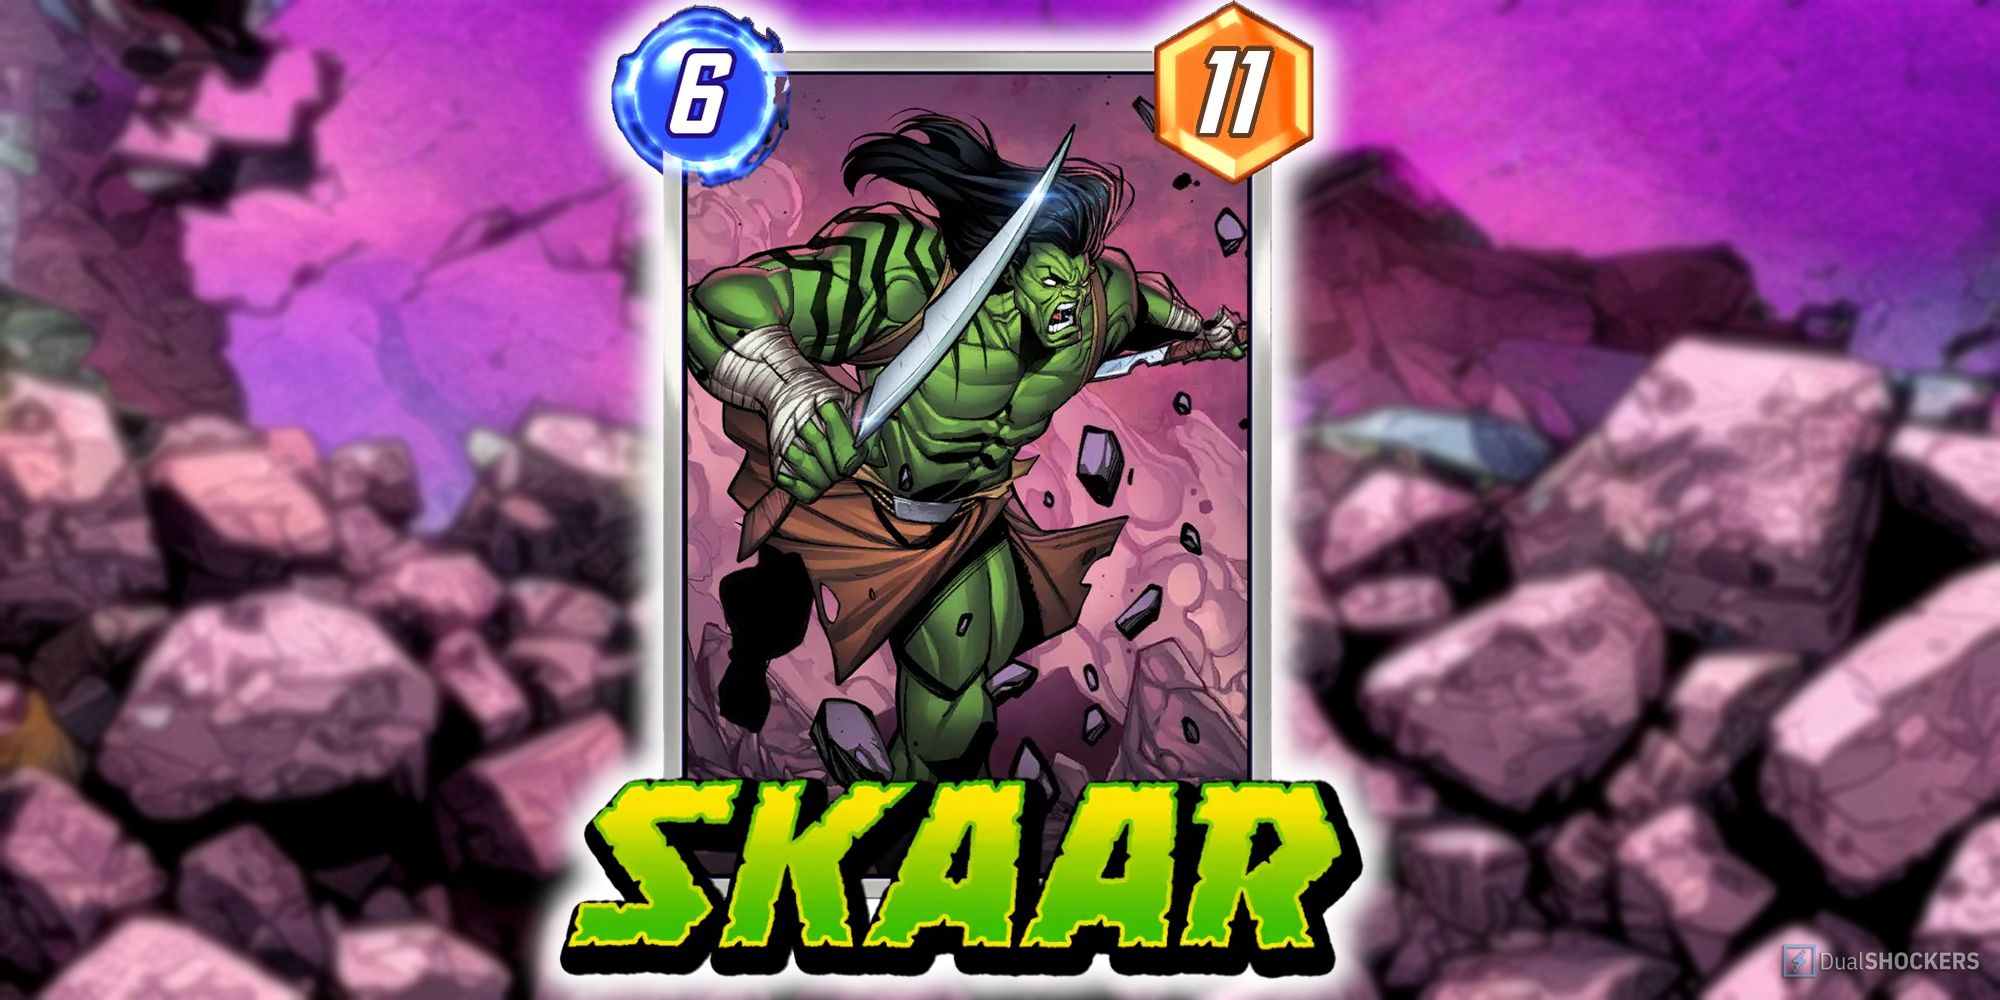 Marvel Snap's Skaar card surrounded by purple rubble.